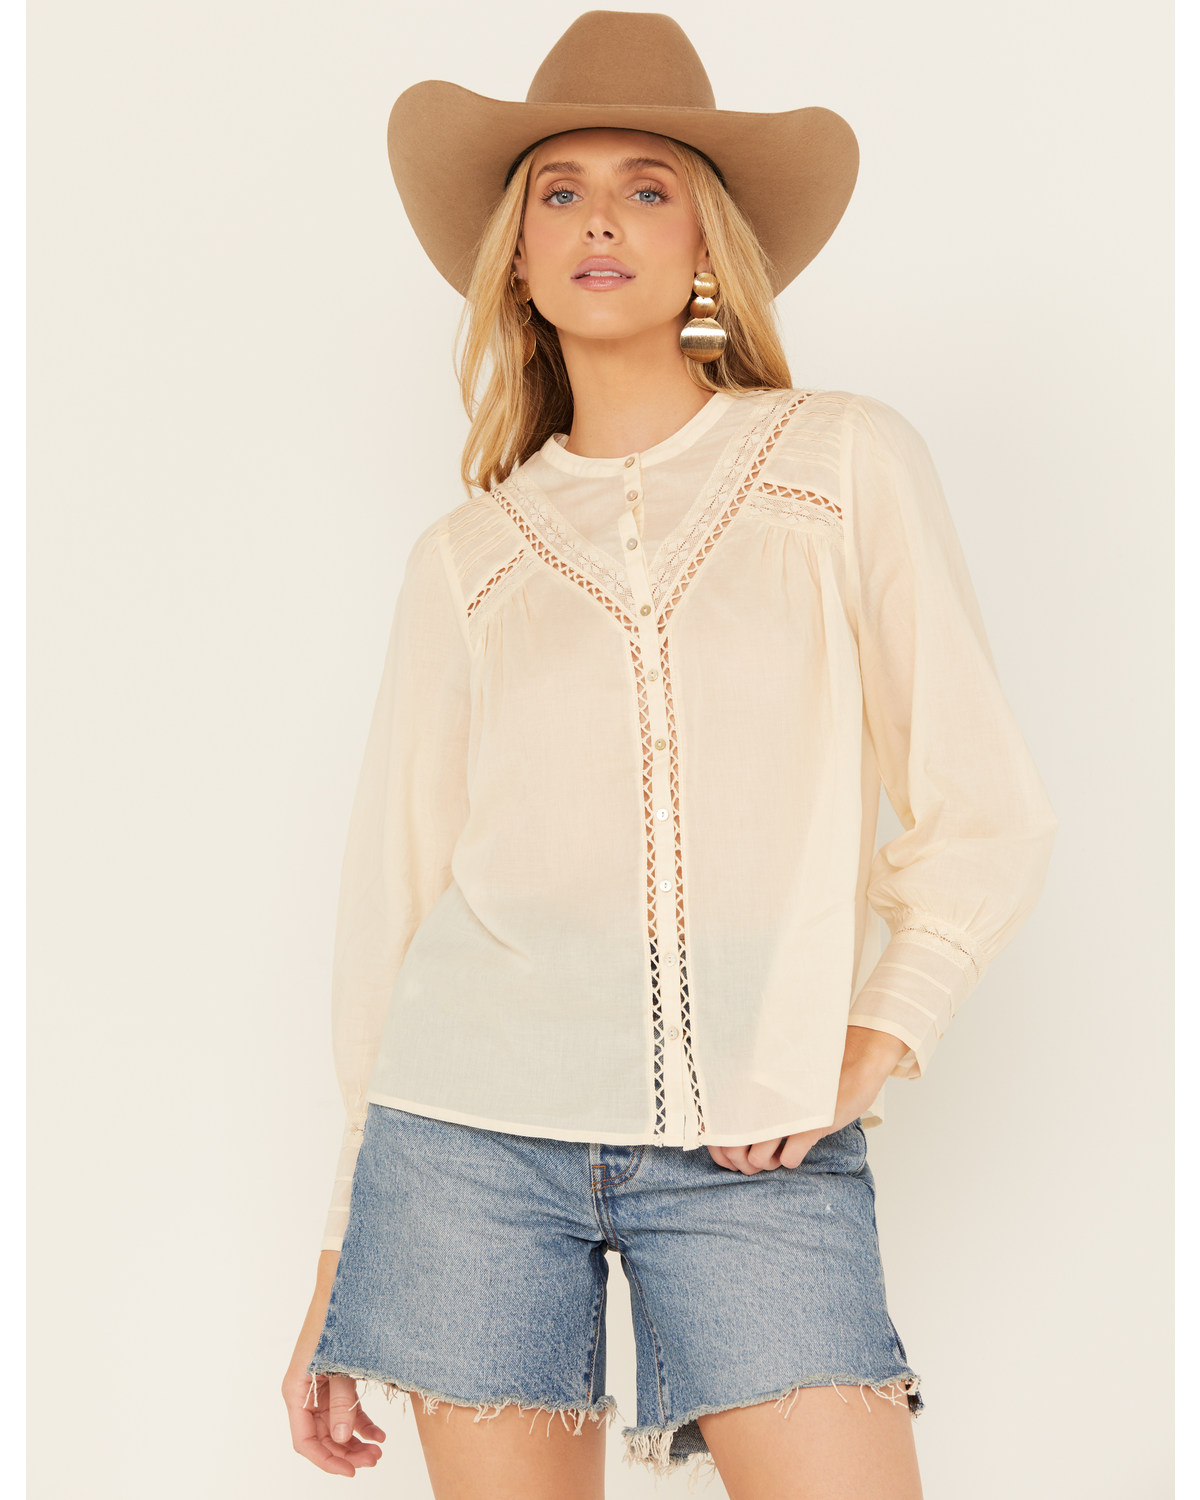 Bila Women's Long Sleeve Embroidered Peasant Top